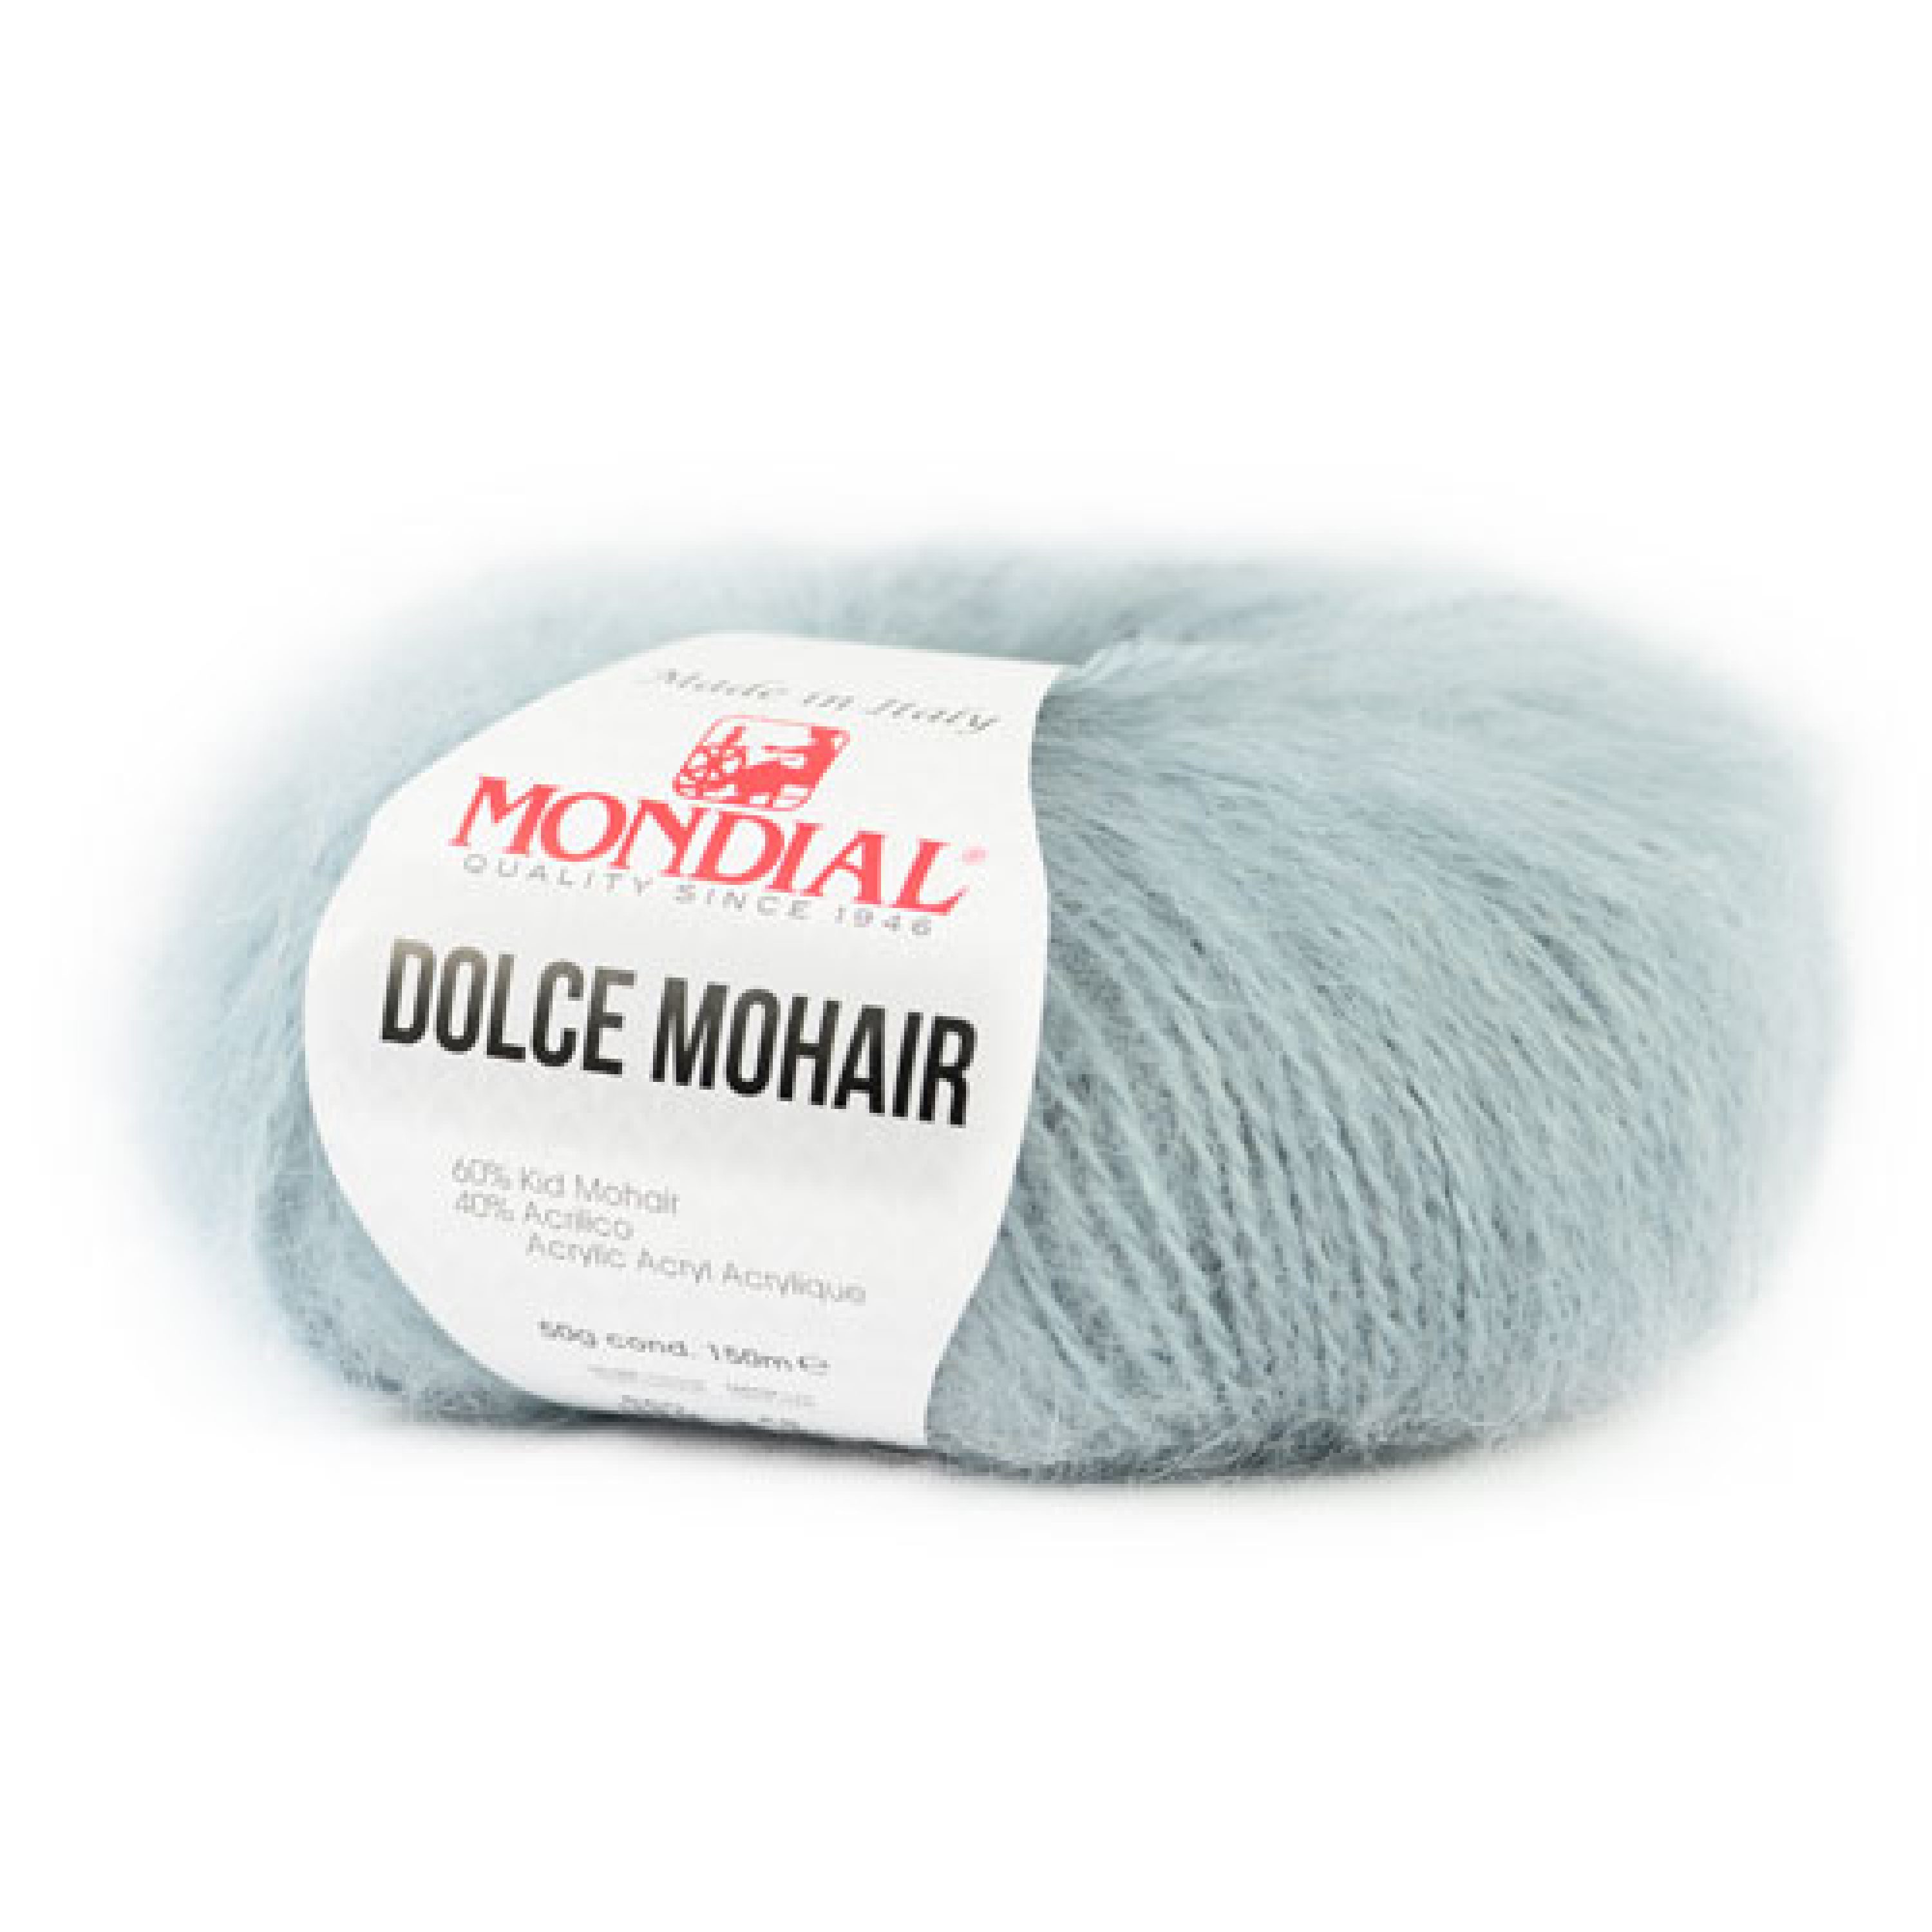 dolce_mohair